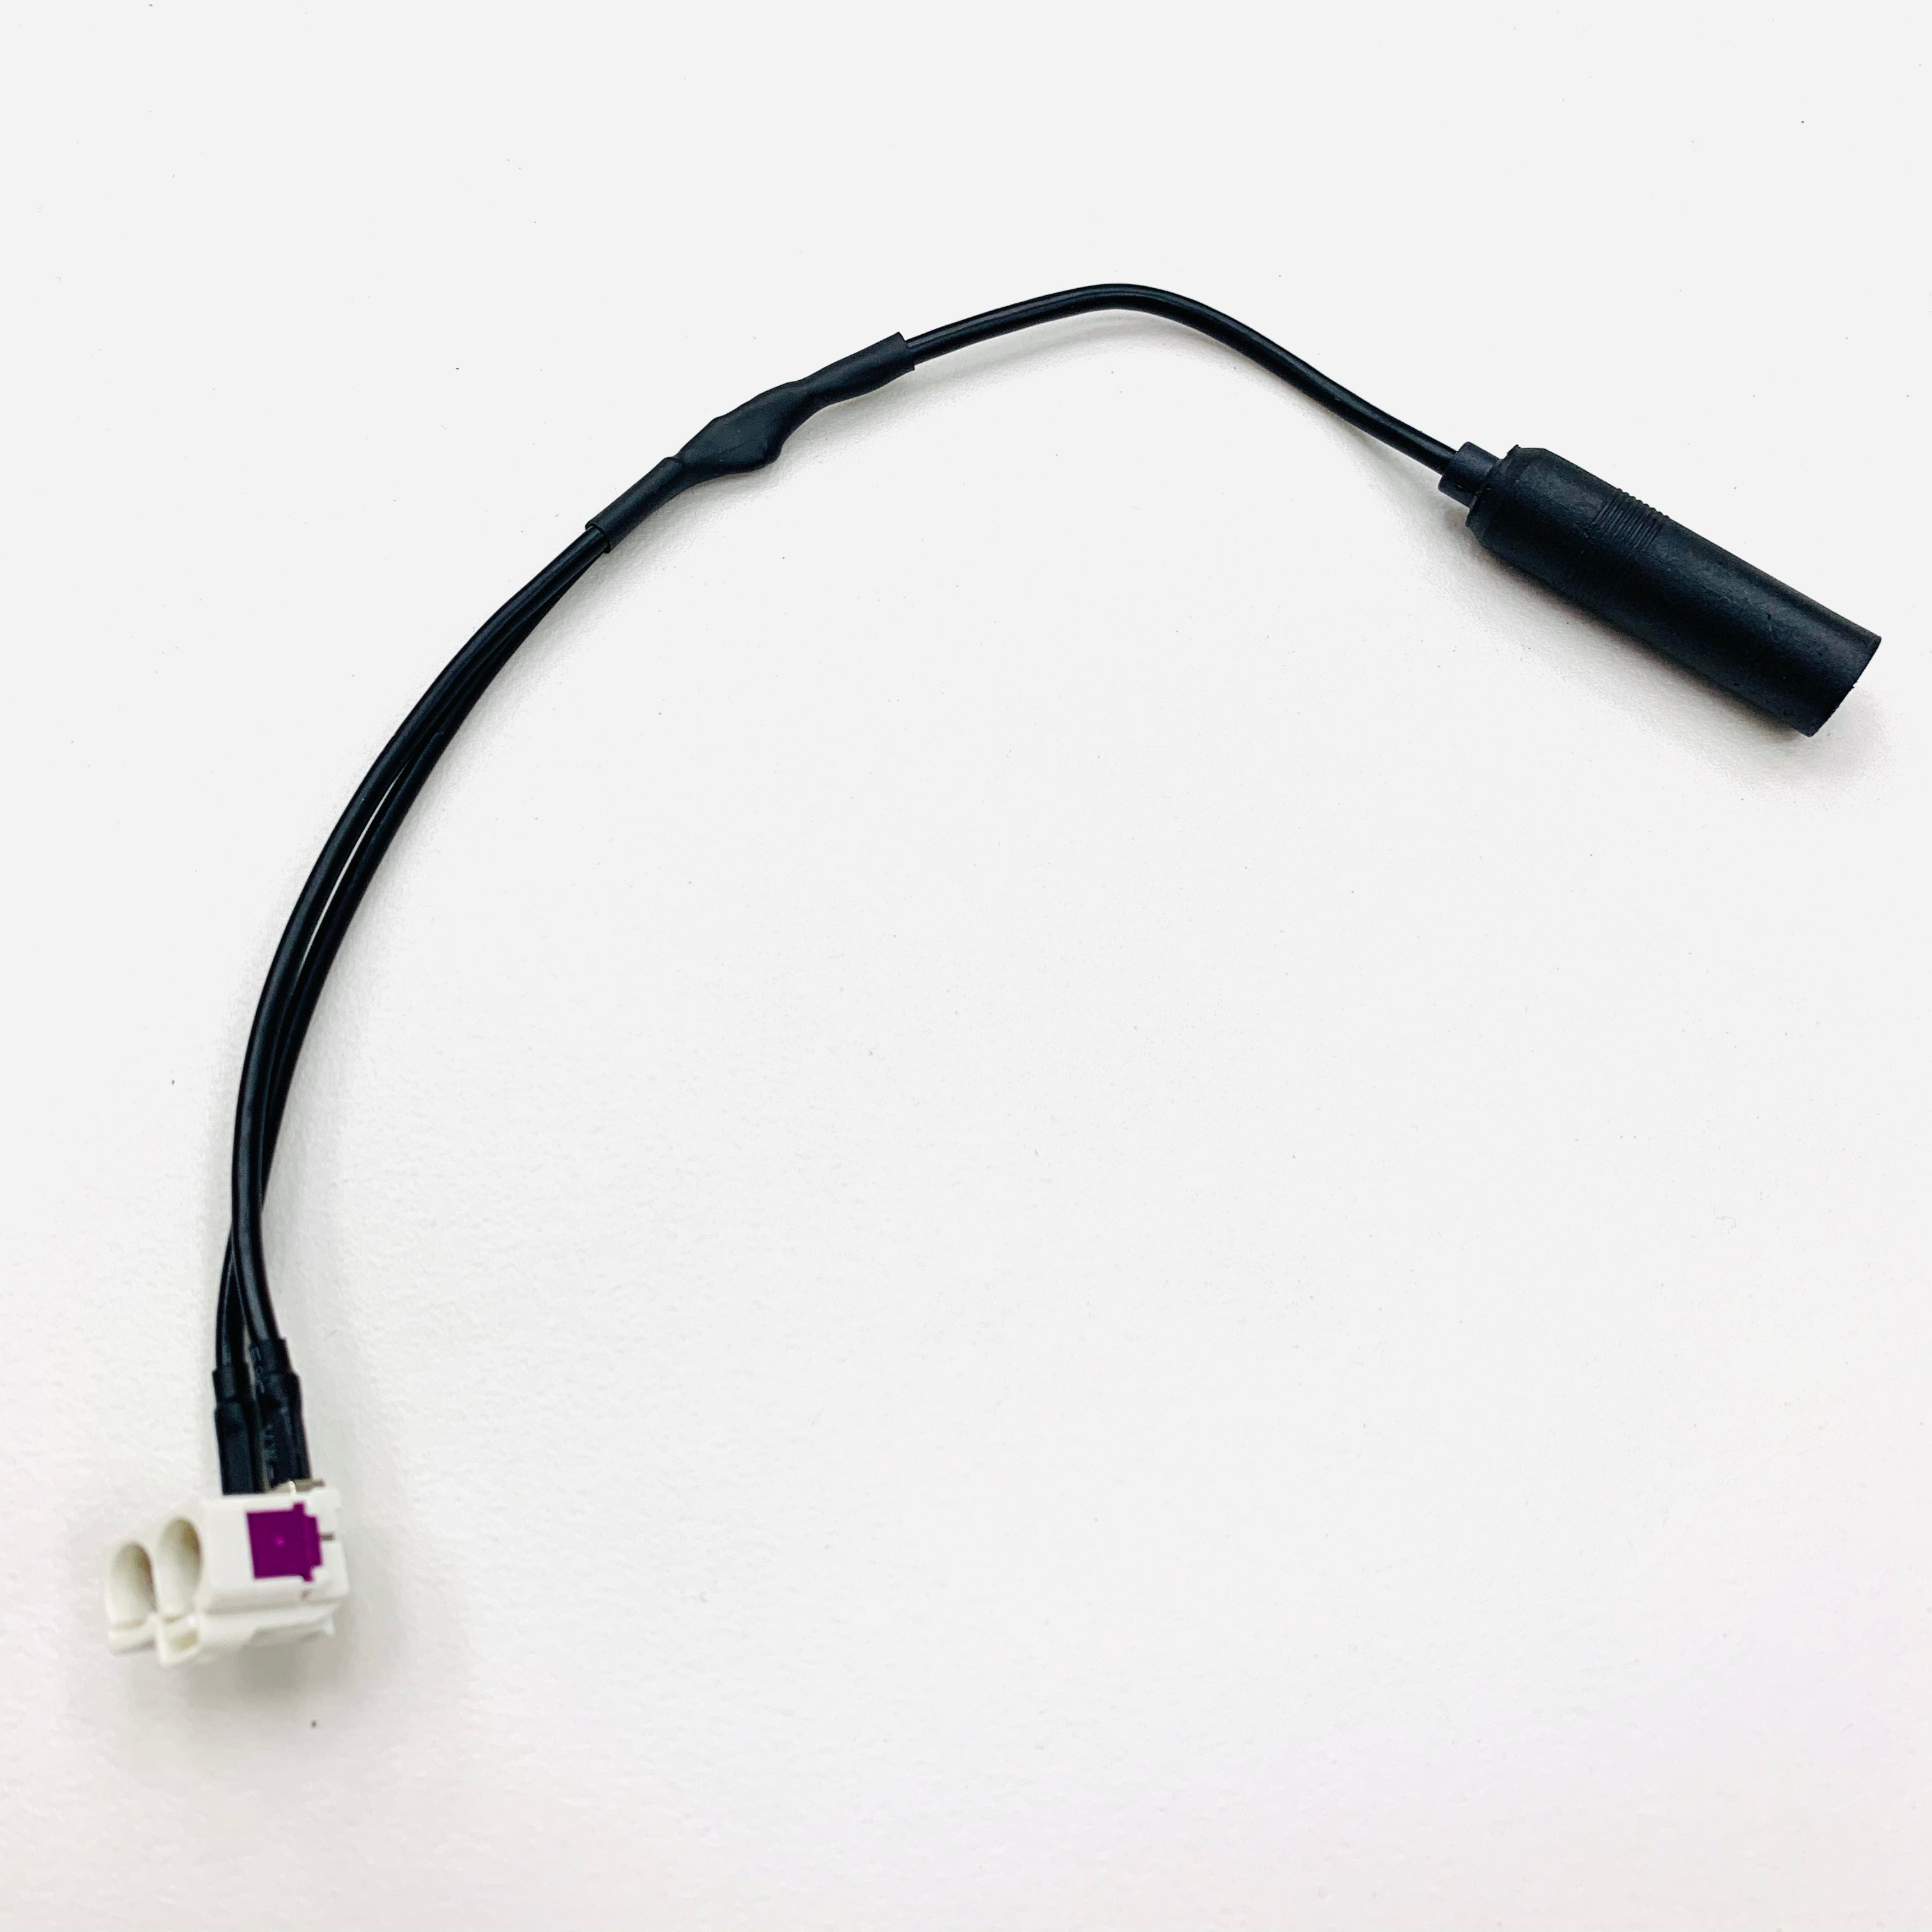 ATD CAA-13116 Aerial To DIN Antenna Connector Adaptor Antenna Lead Dual  Fakra To ISO - Audio Tech Direct